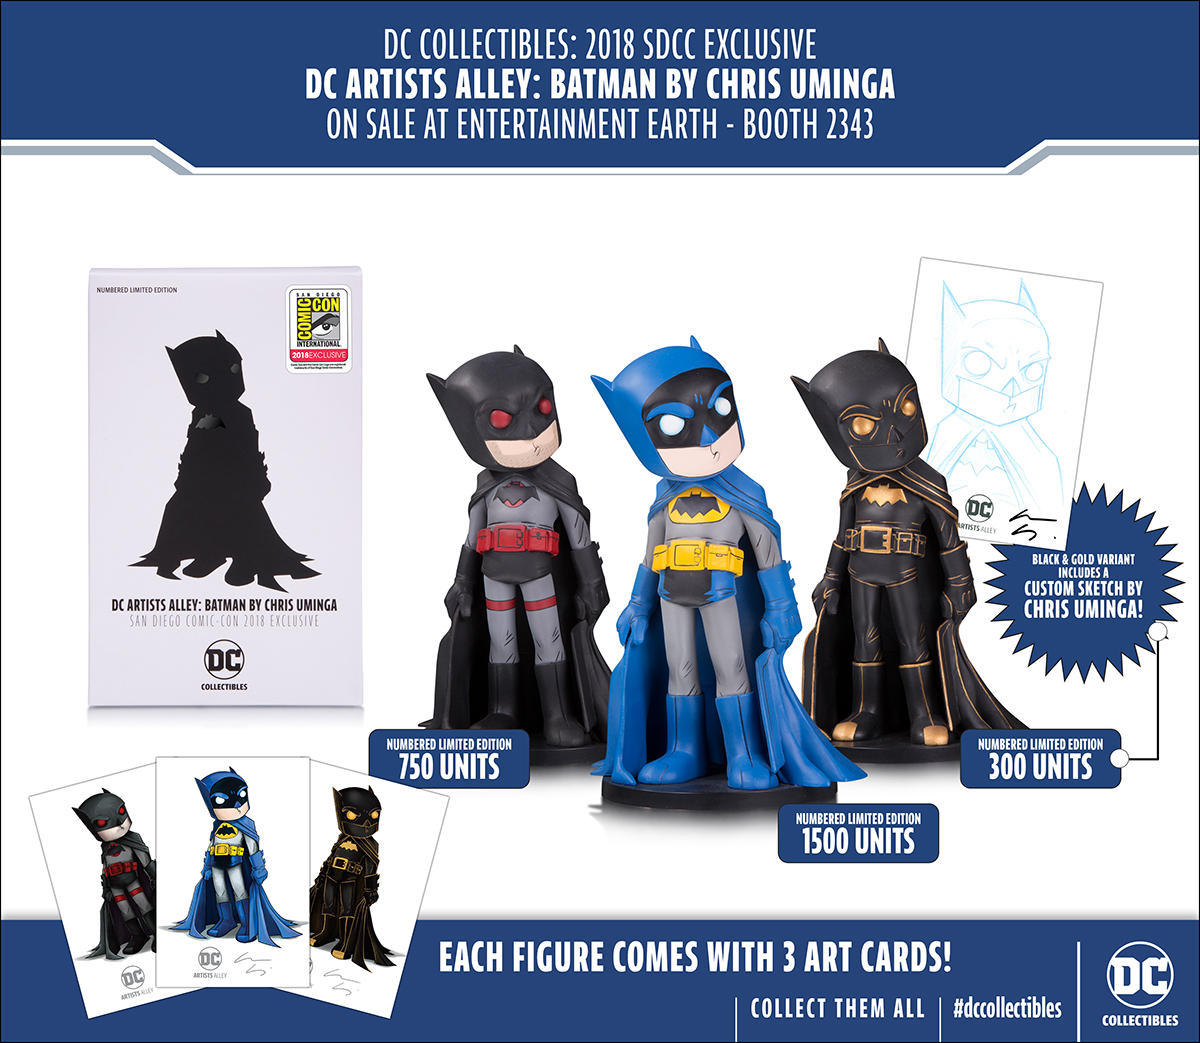 DC Artists Alley San Diego Comic-Con 2018 Exclusives